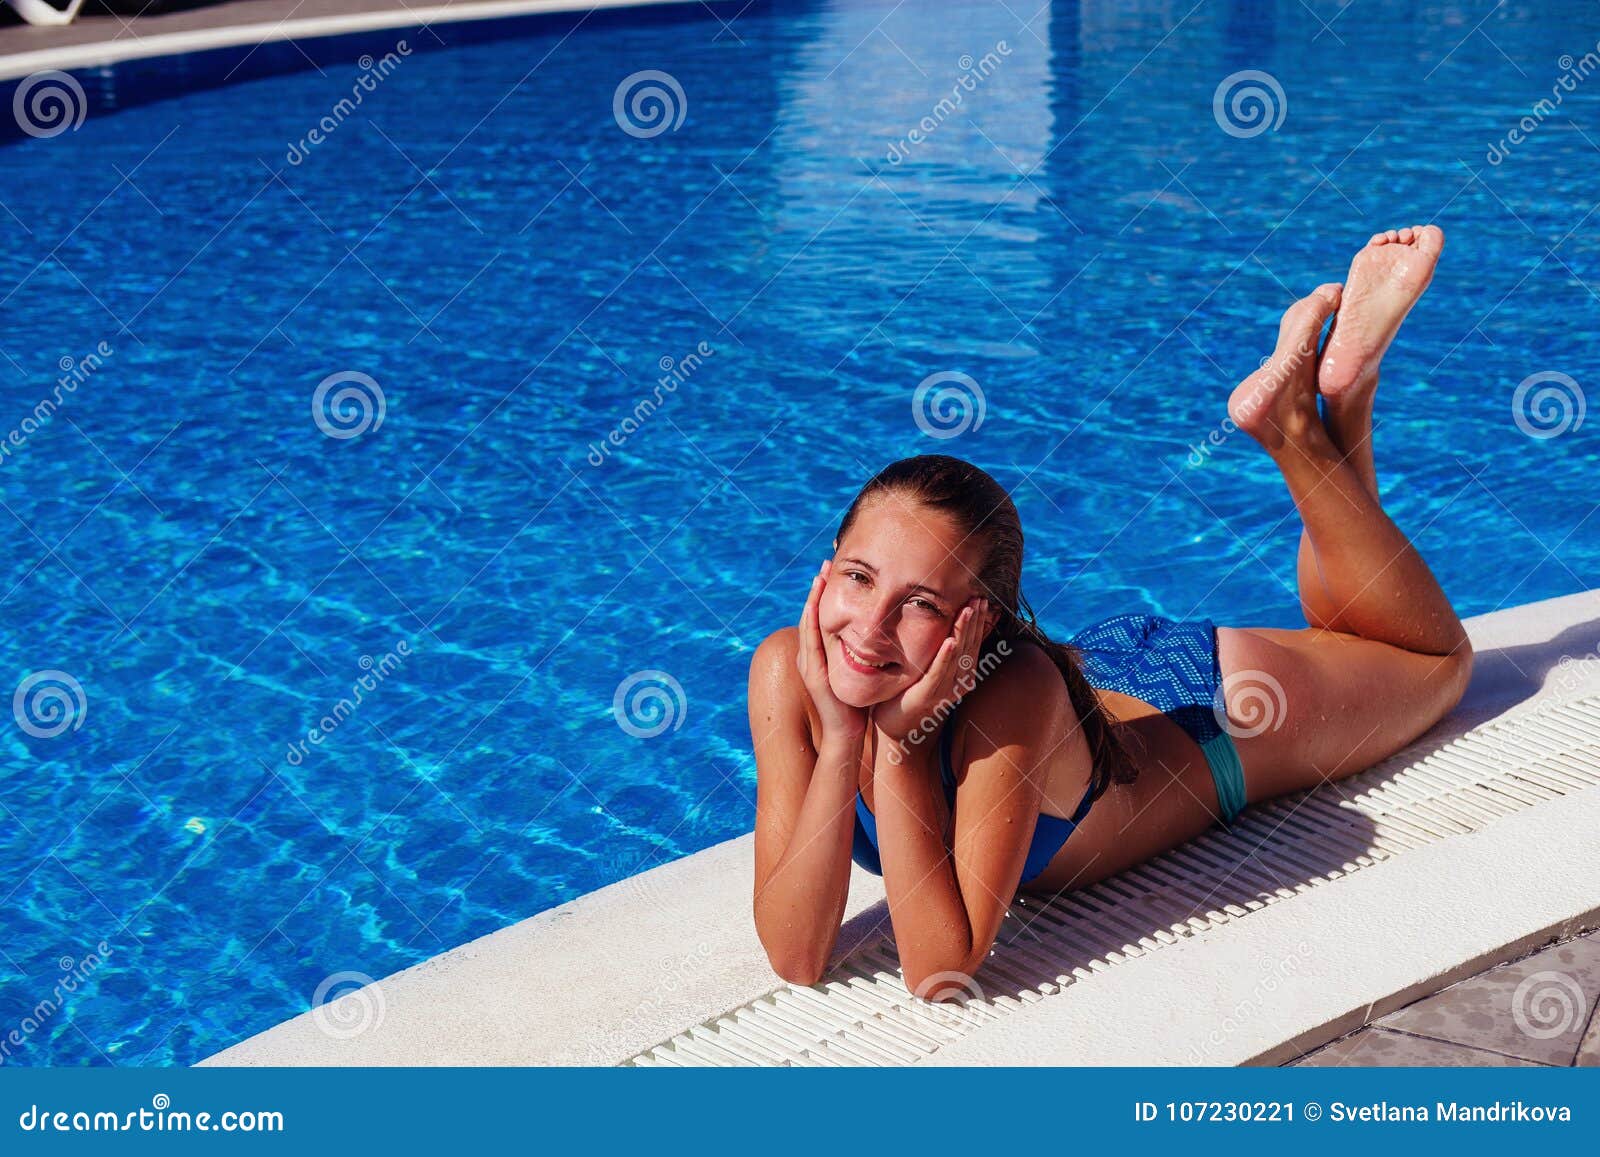 audrey oh recommends teen girls at the pool pic